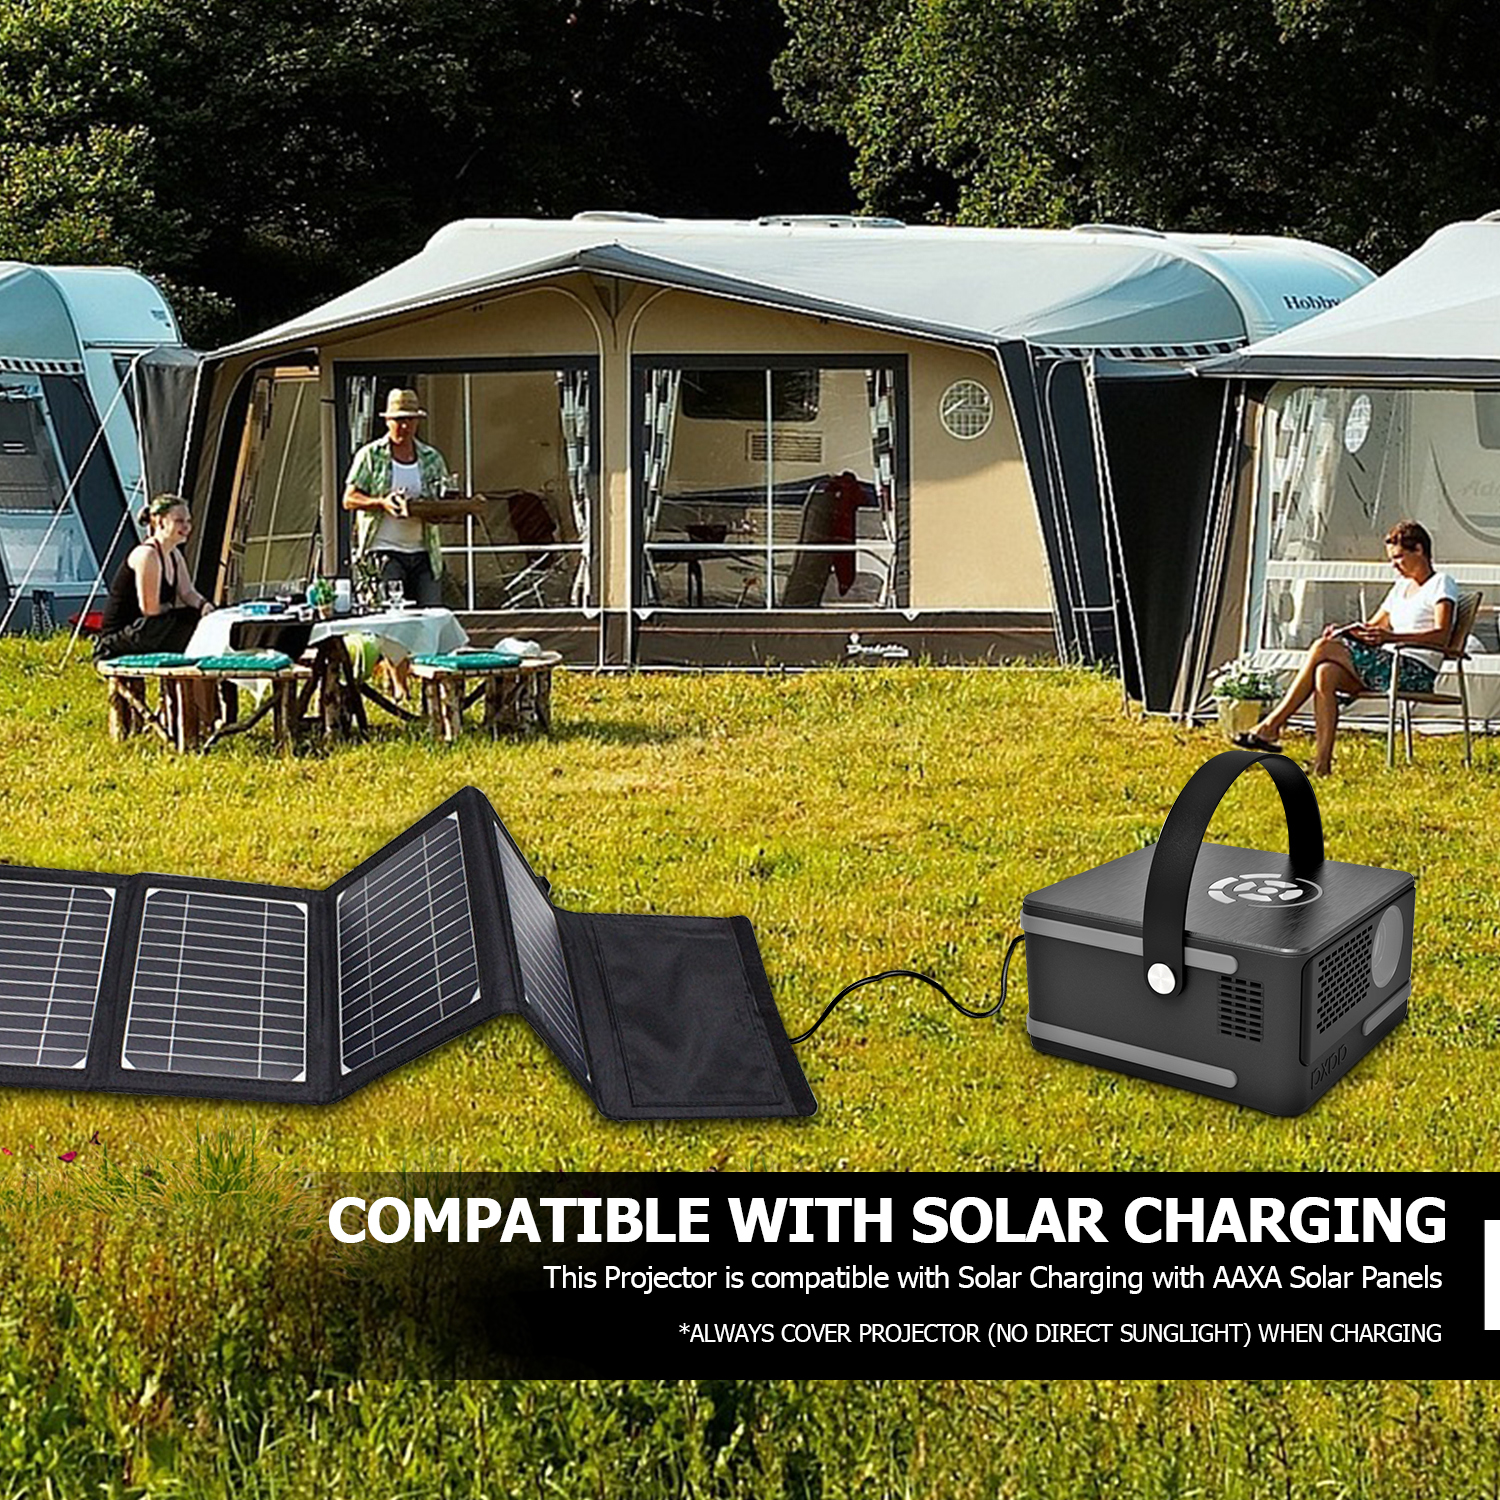 Charge it on the go with solar panel technology!